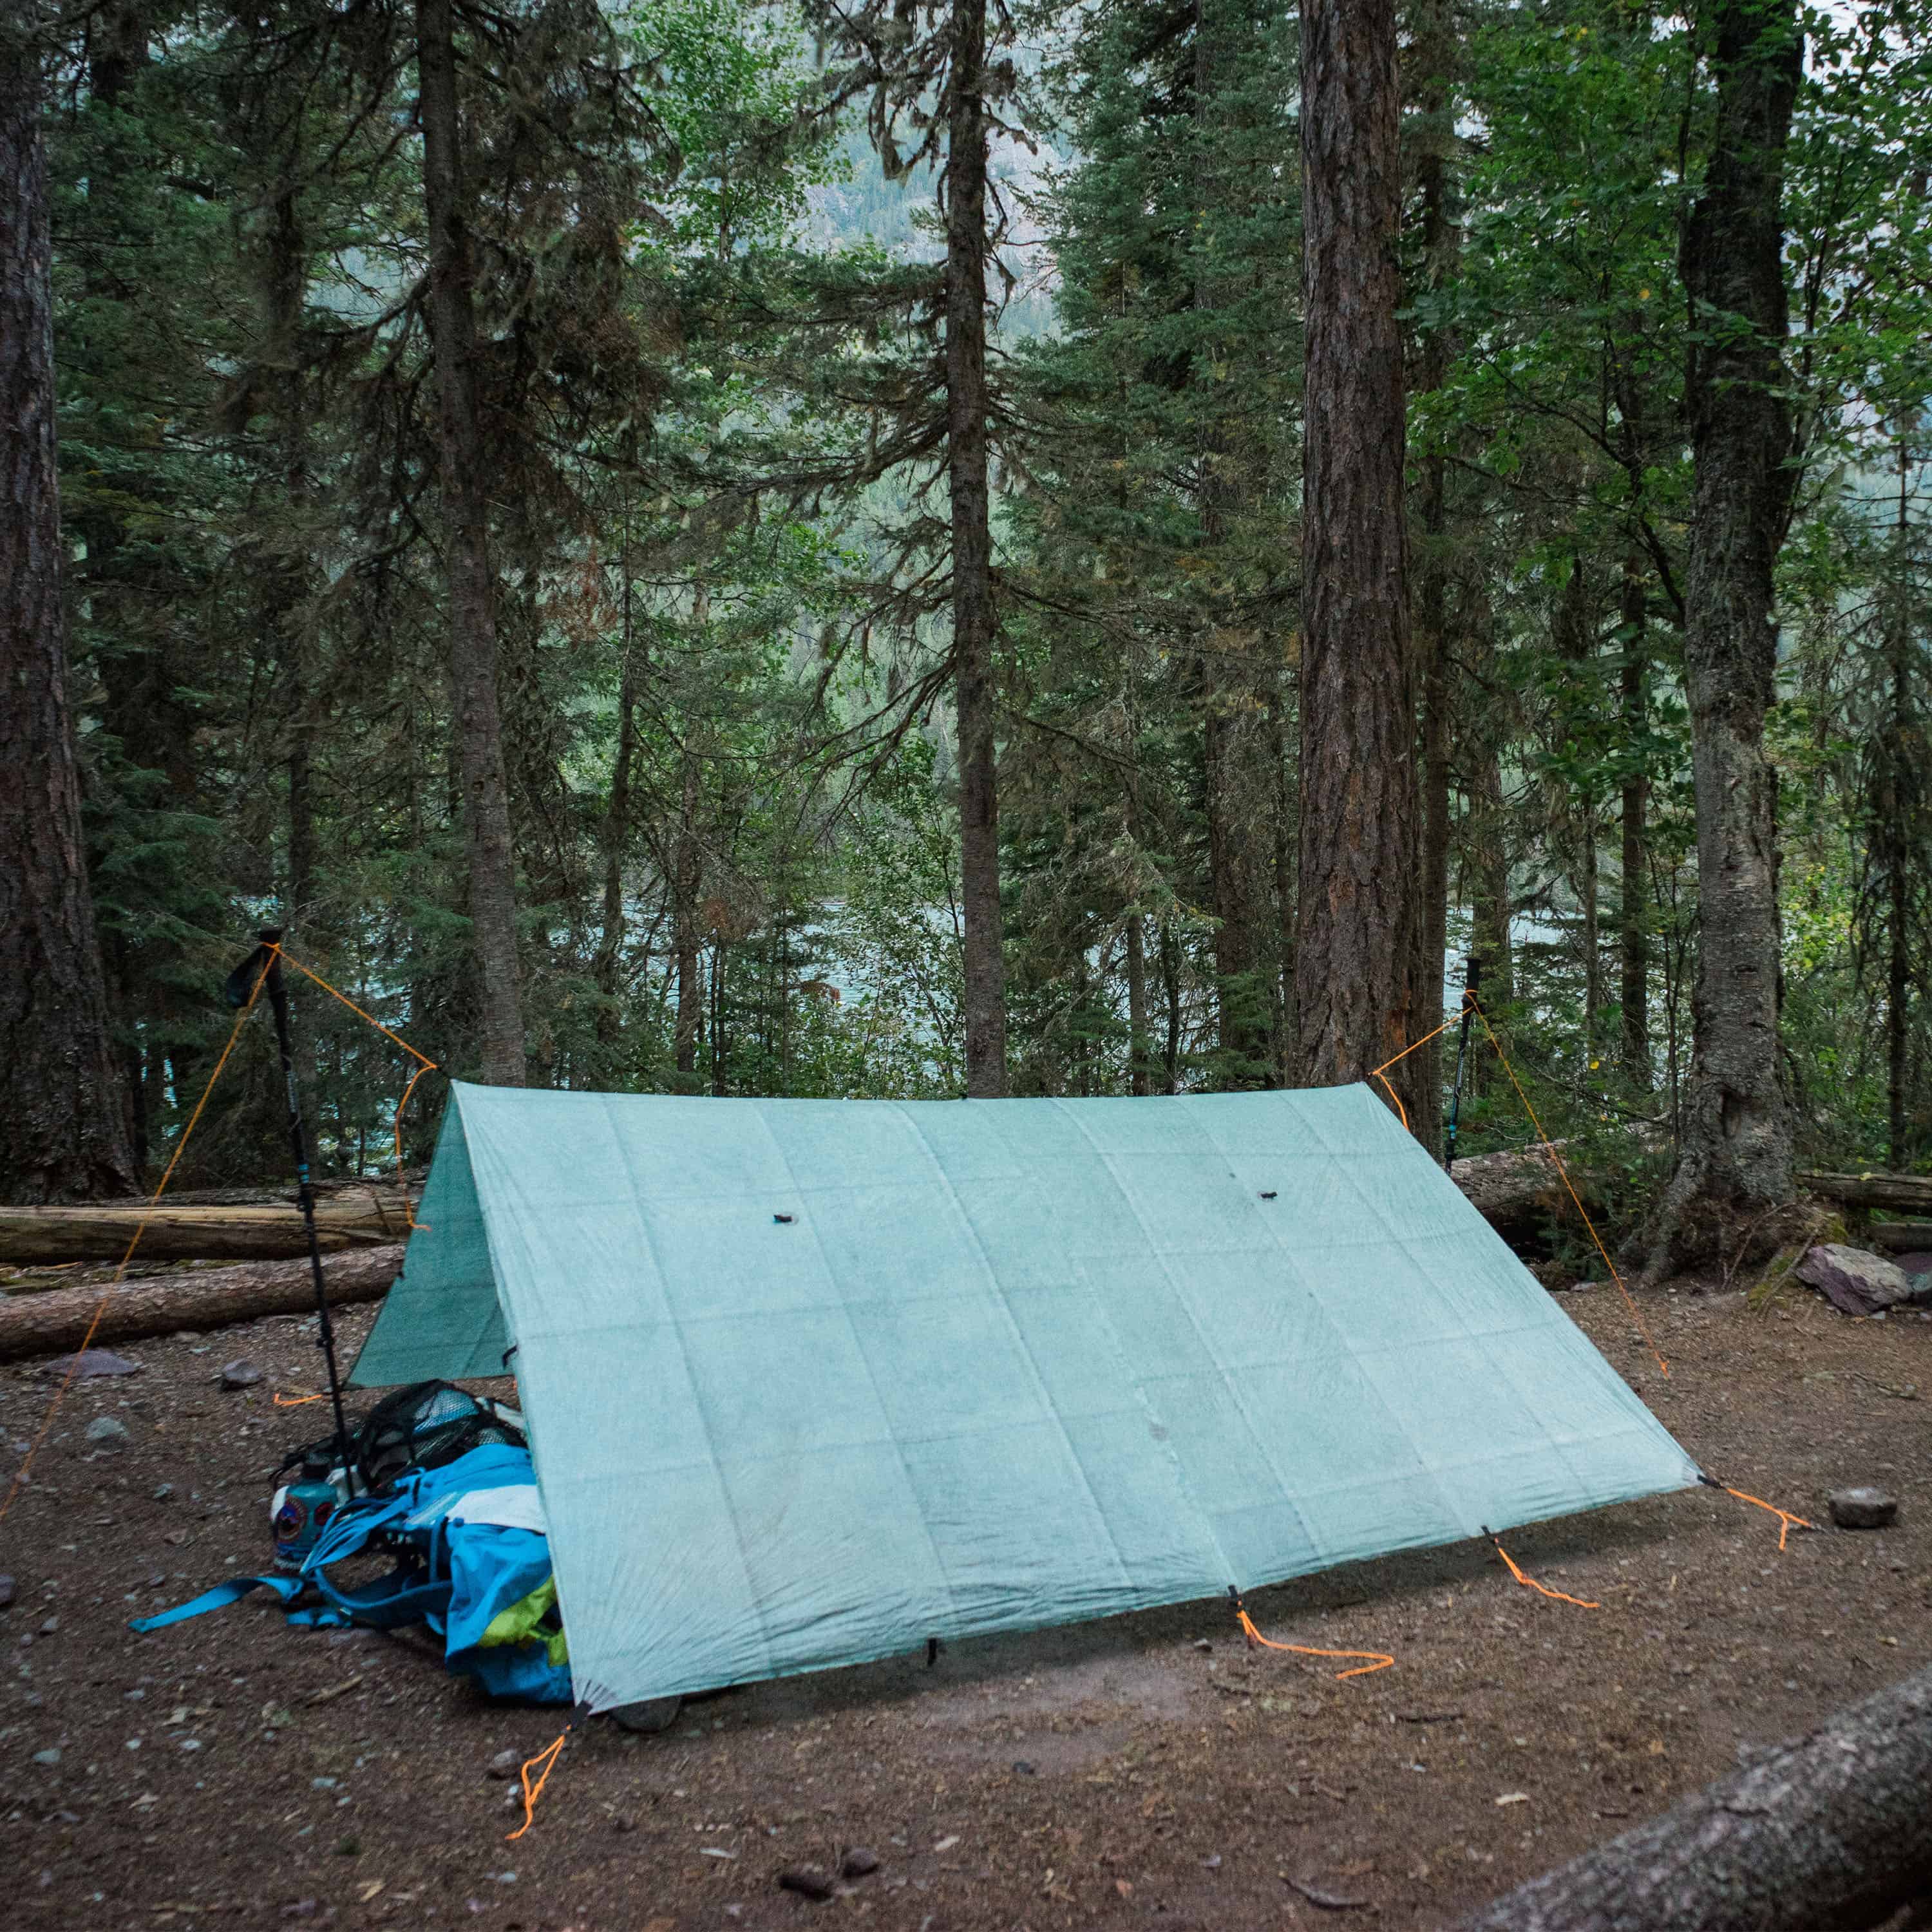 Choosing the Best Rope for Your Camping Tarp